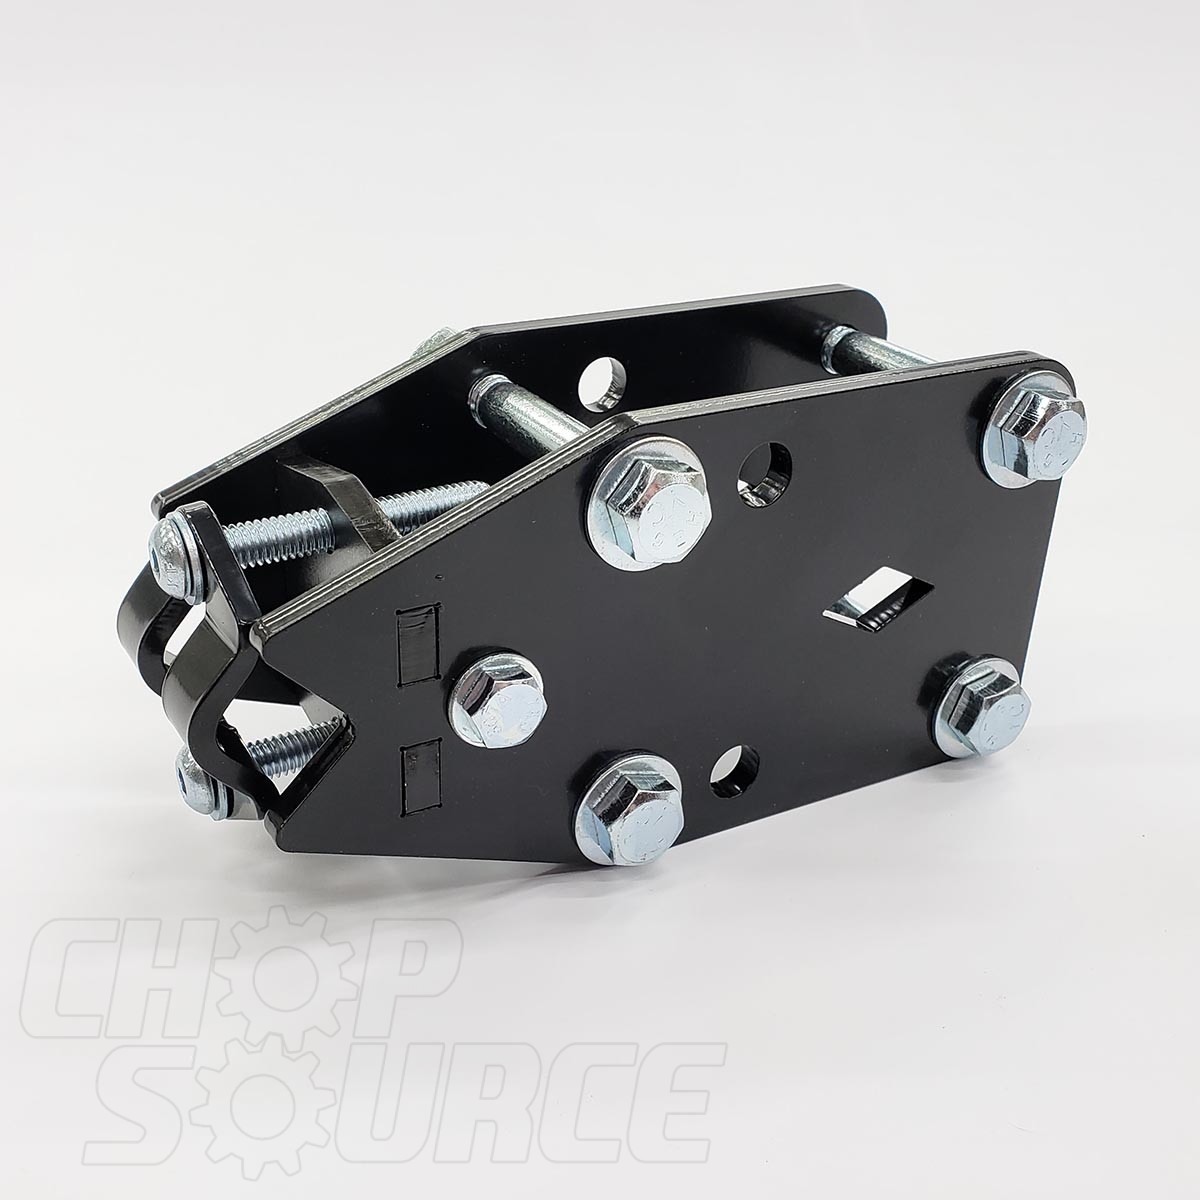 Rear Axle Fixture (for Bicycle and Mini Bike Frame Jigs)